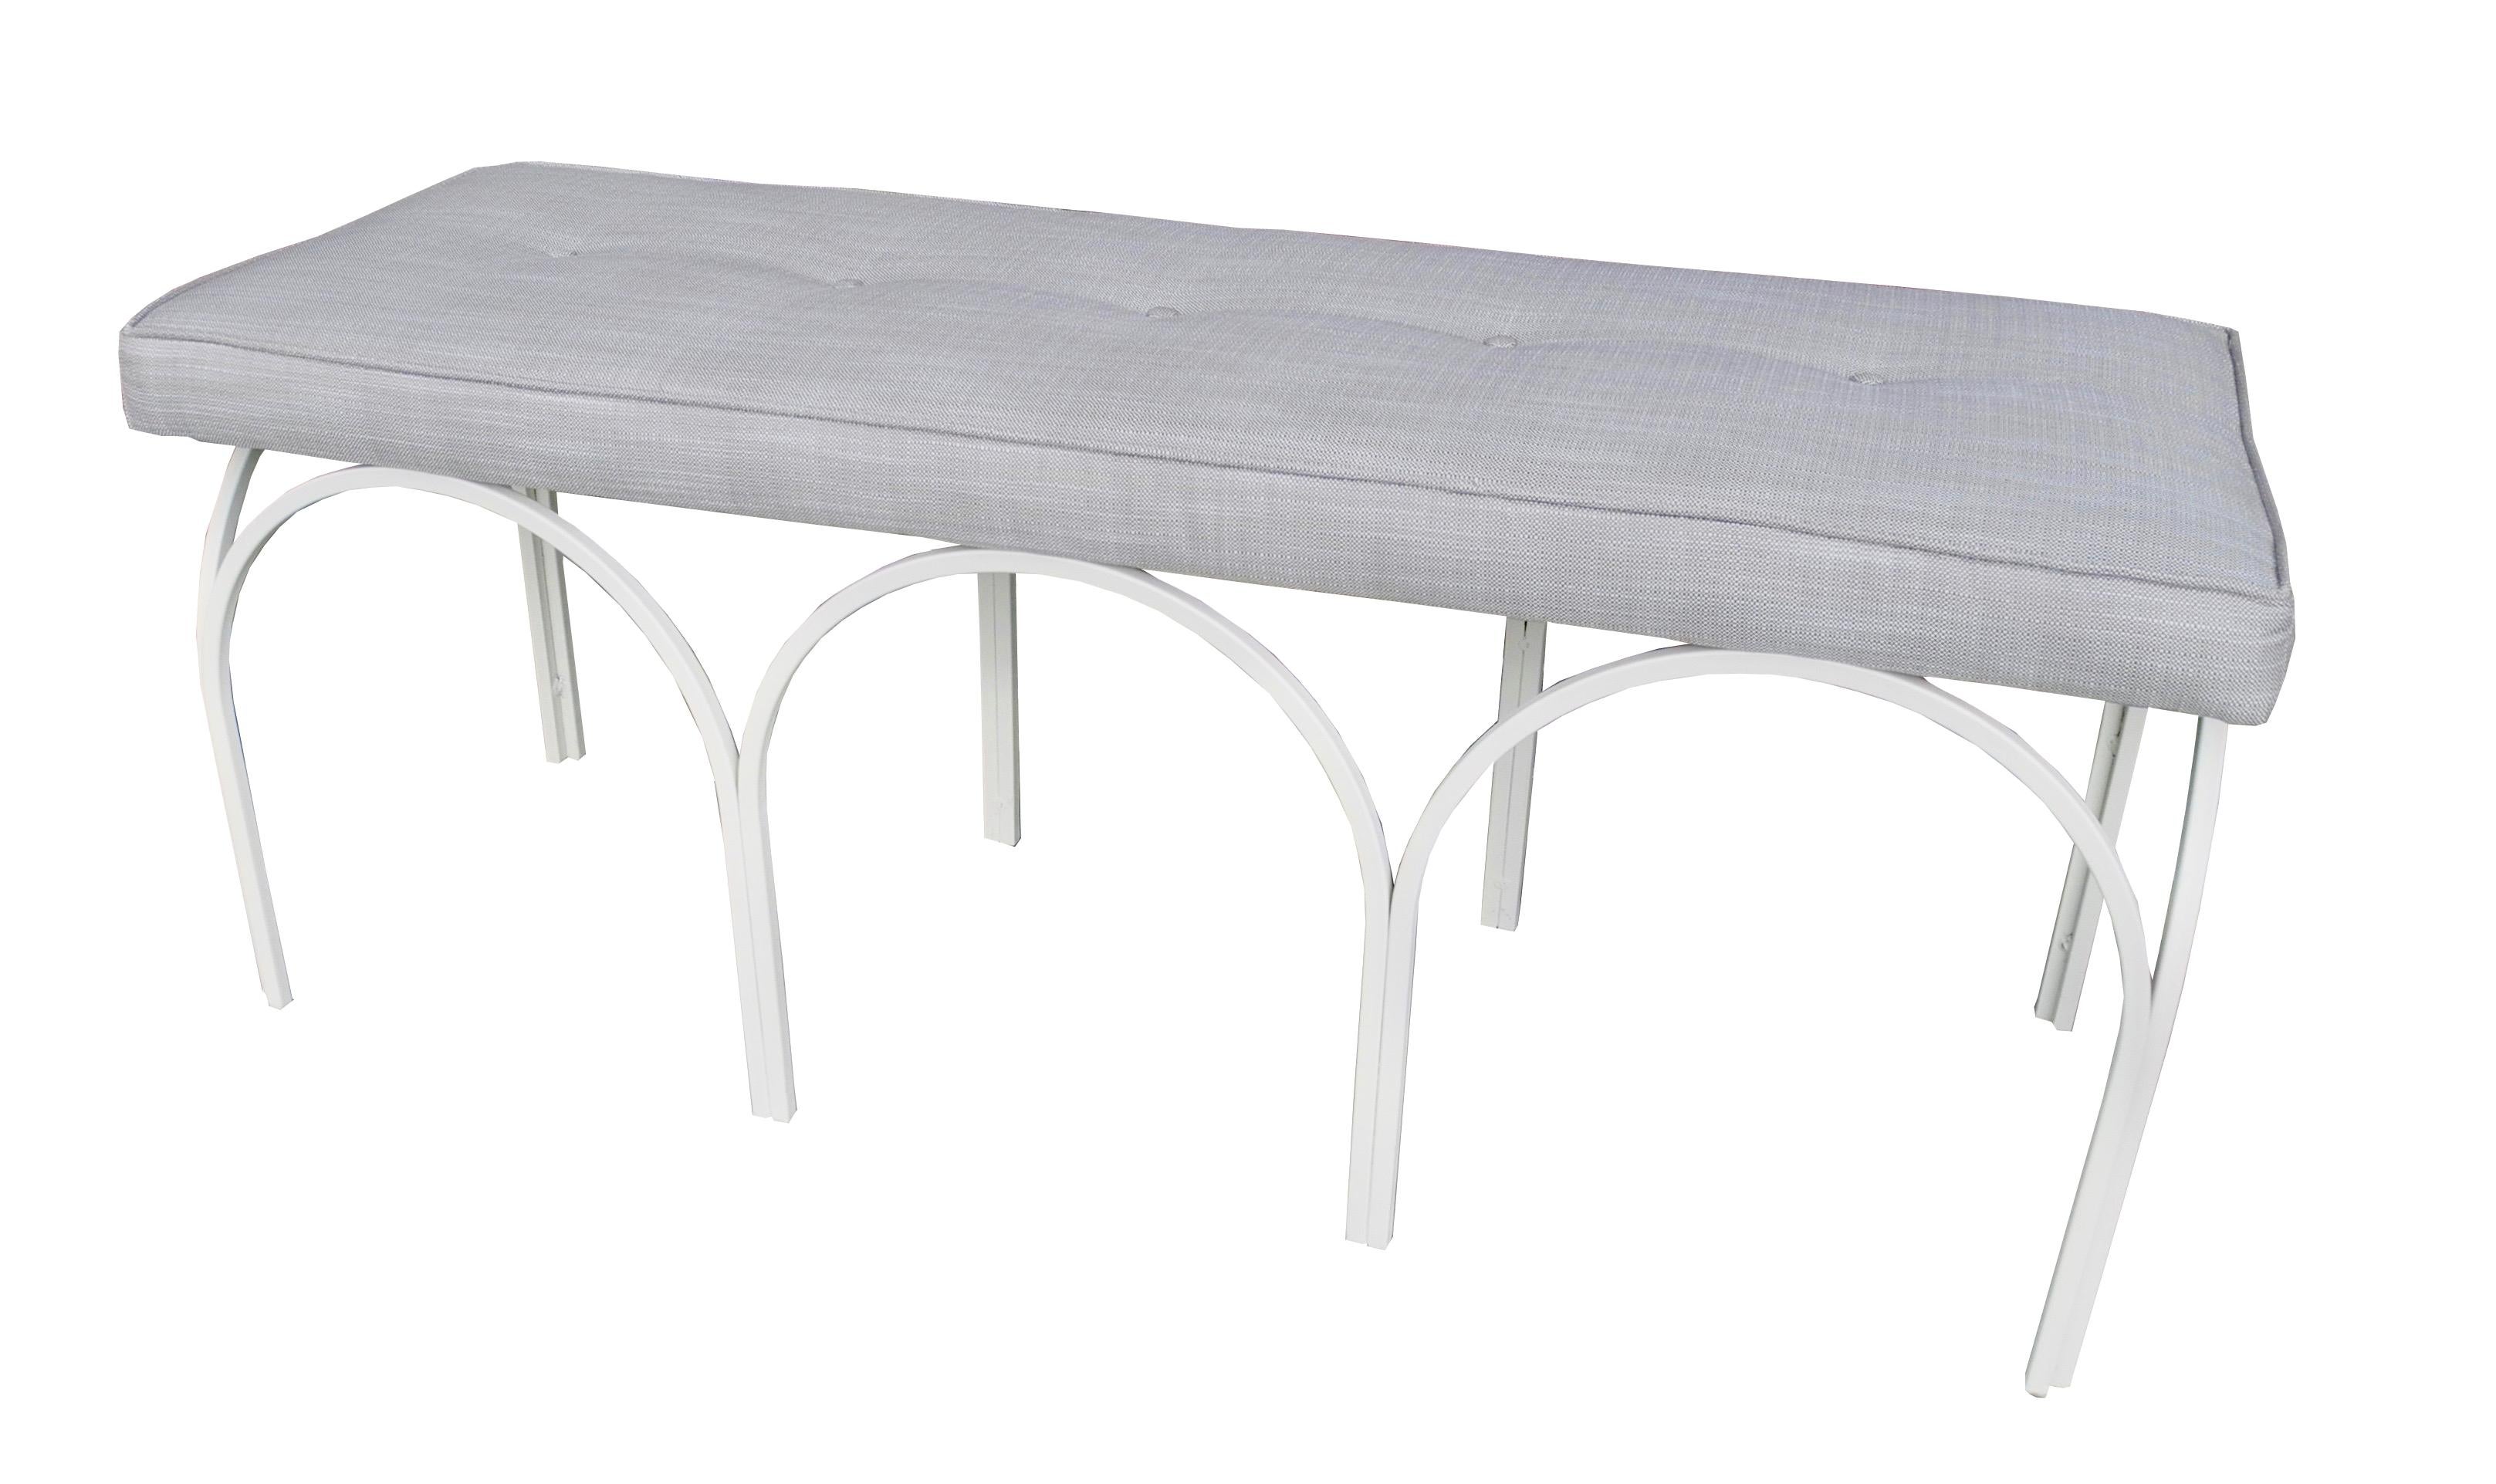 American Mid-Century Modern Upholstered Bench by Industrial Artist Frederick Weinberg For Sale